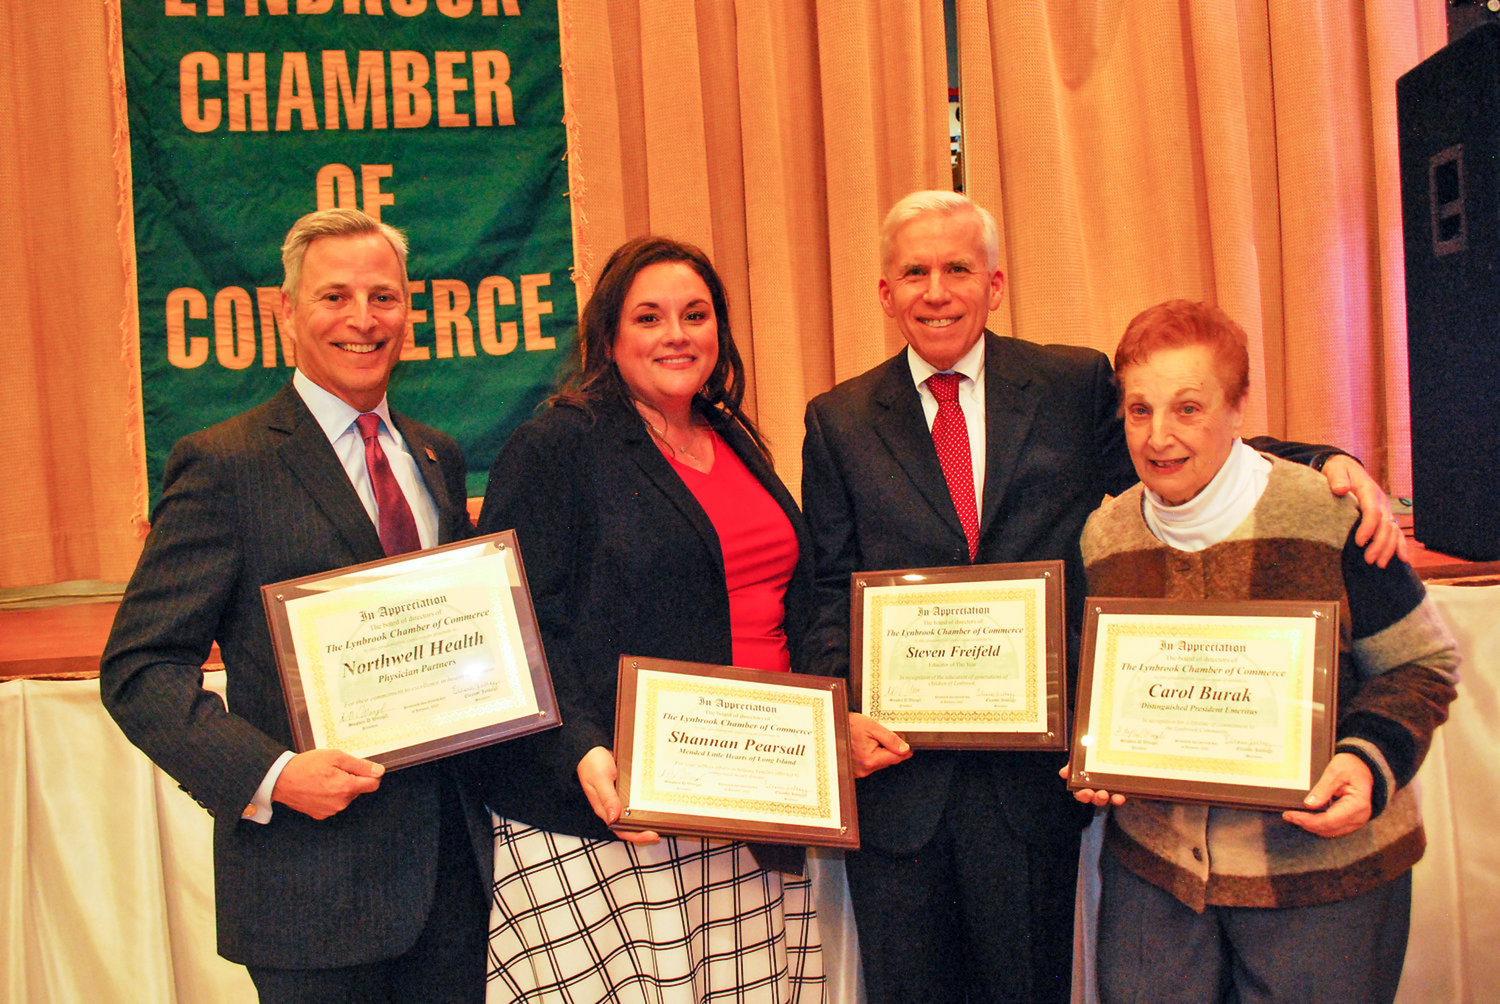 The Lynbrook Chamber Commerce has moved its Evening of Excellence from Jan. 15 to June 4. Above, 2020 honorees, from left, Ira Nash, Shannan Pearsall, Steve Freifeld and Carol Burak.